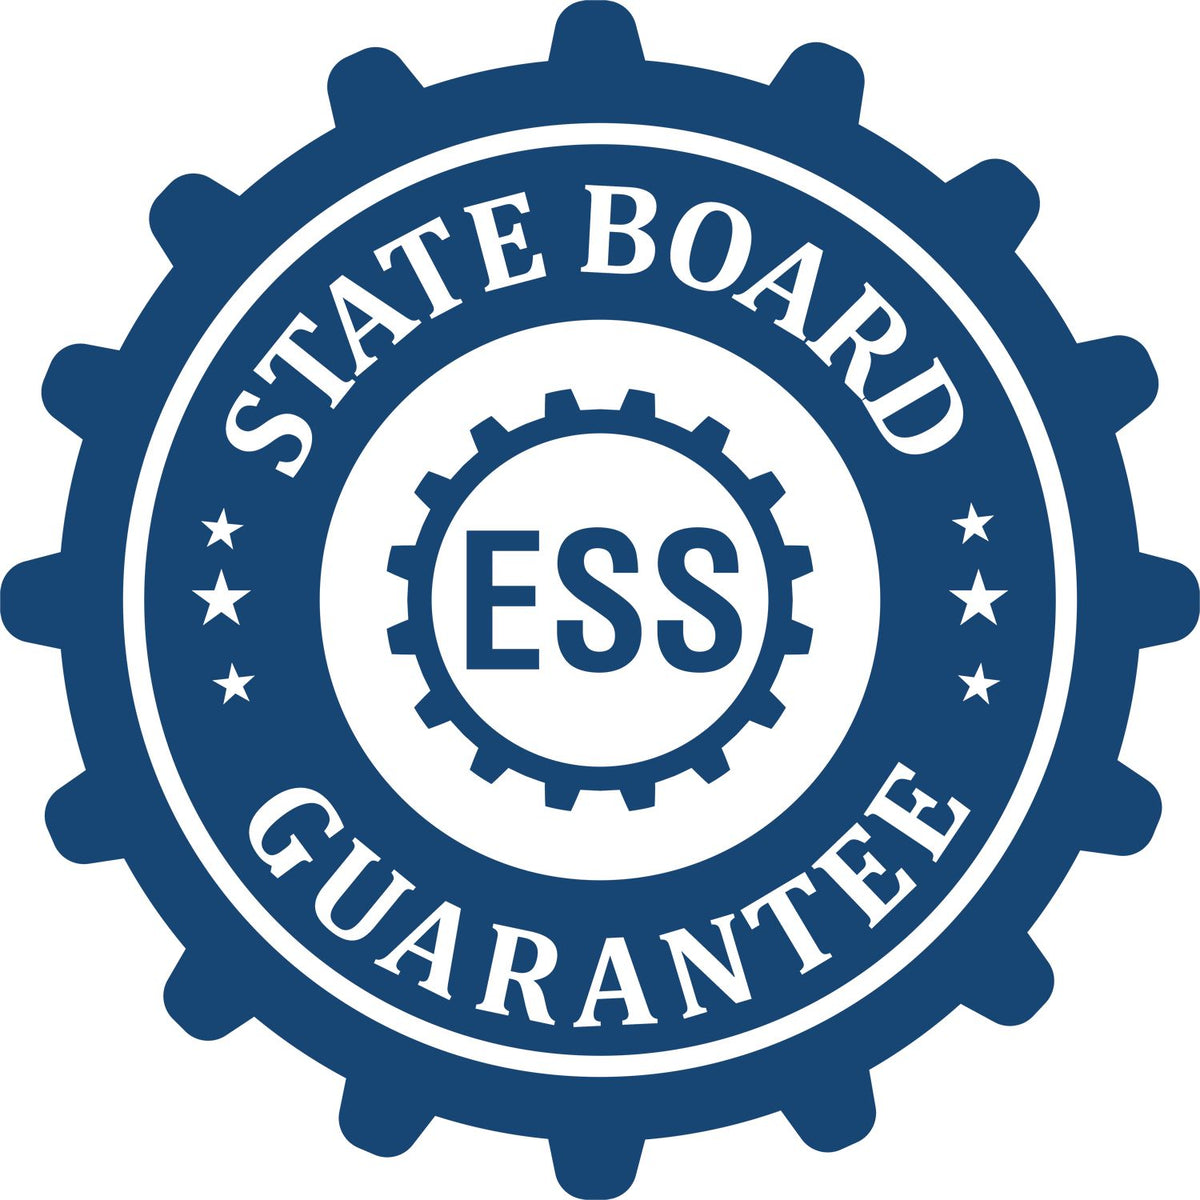 An emblem in a gear shape illustrating a state board guarantee for the Handheld Minnesota Land Surveyor Seal product.